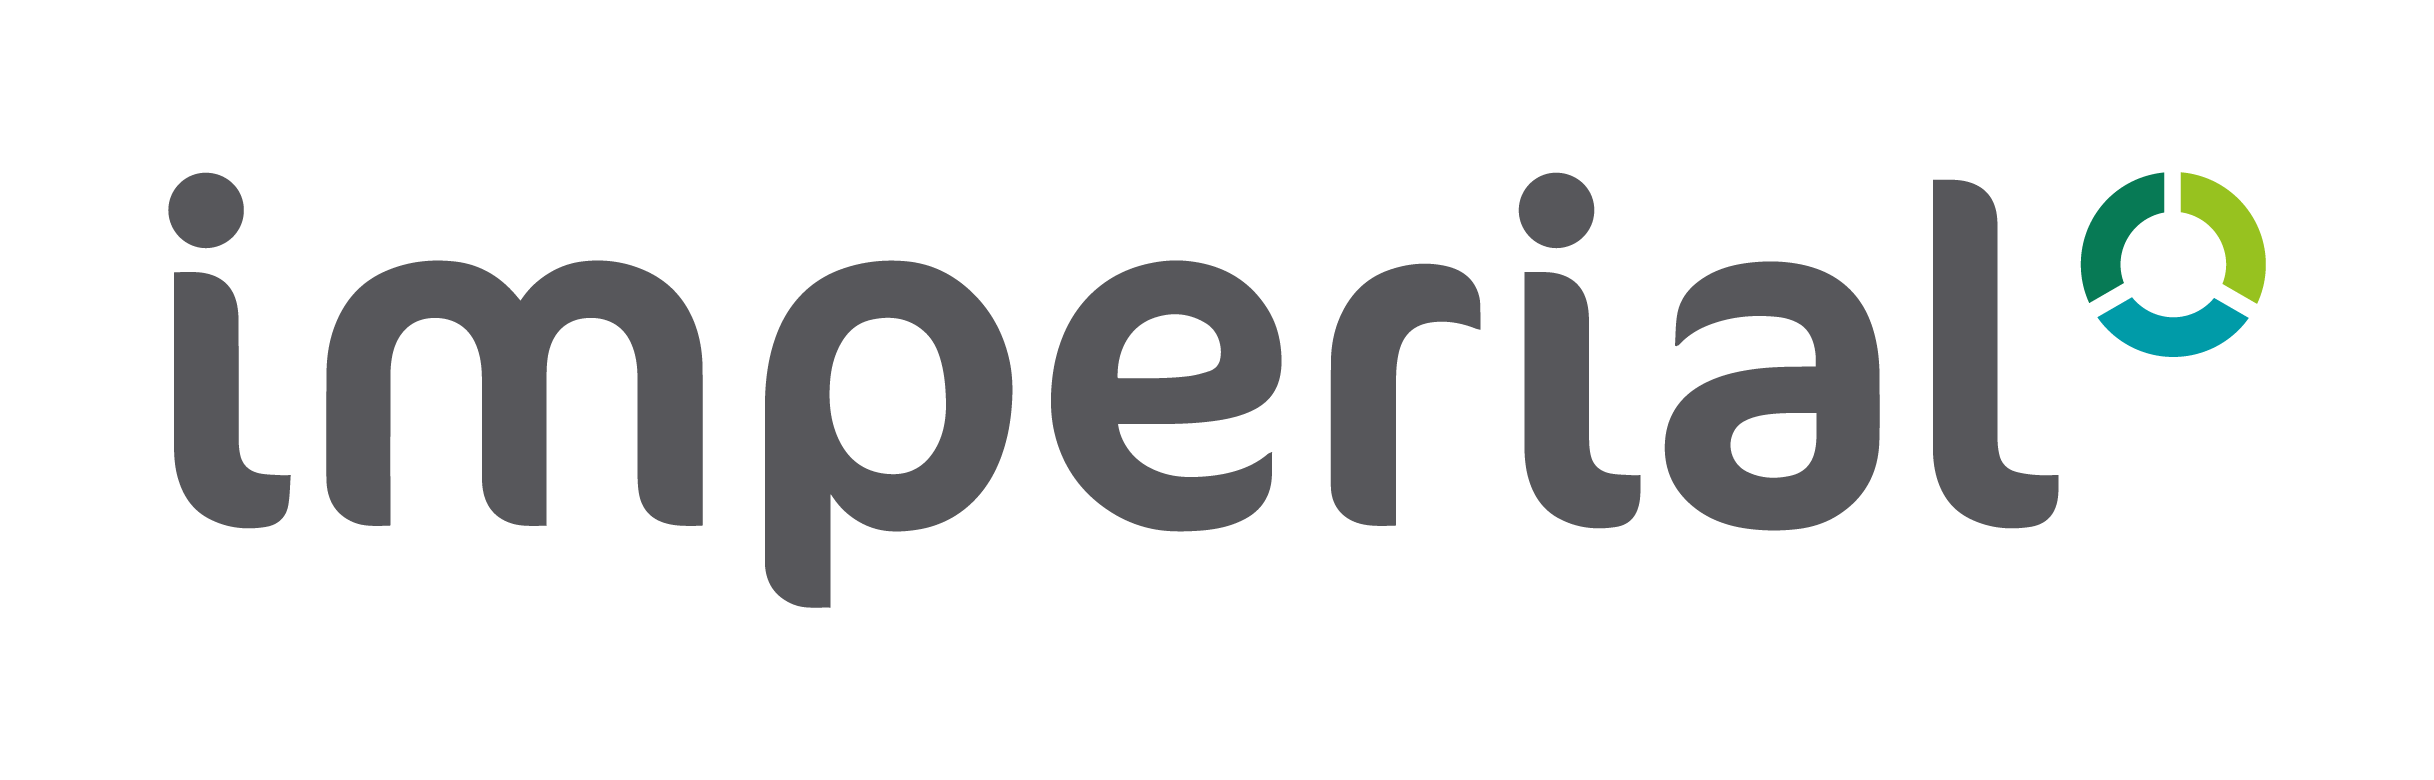 Imperial Parking Logo